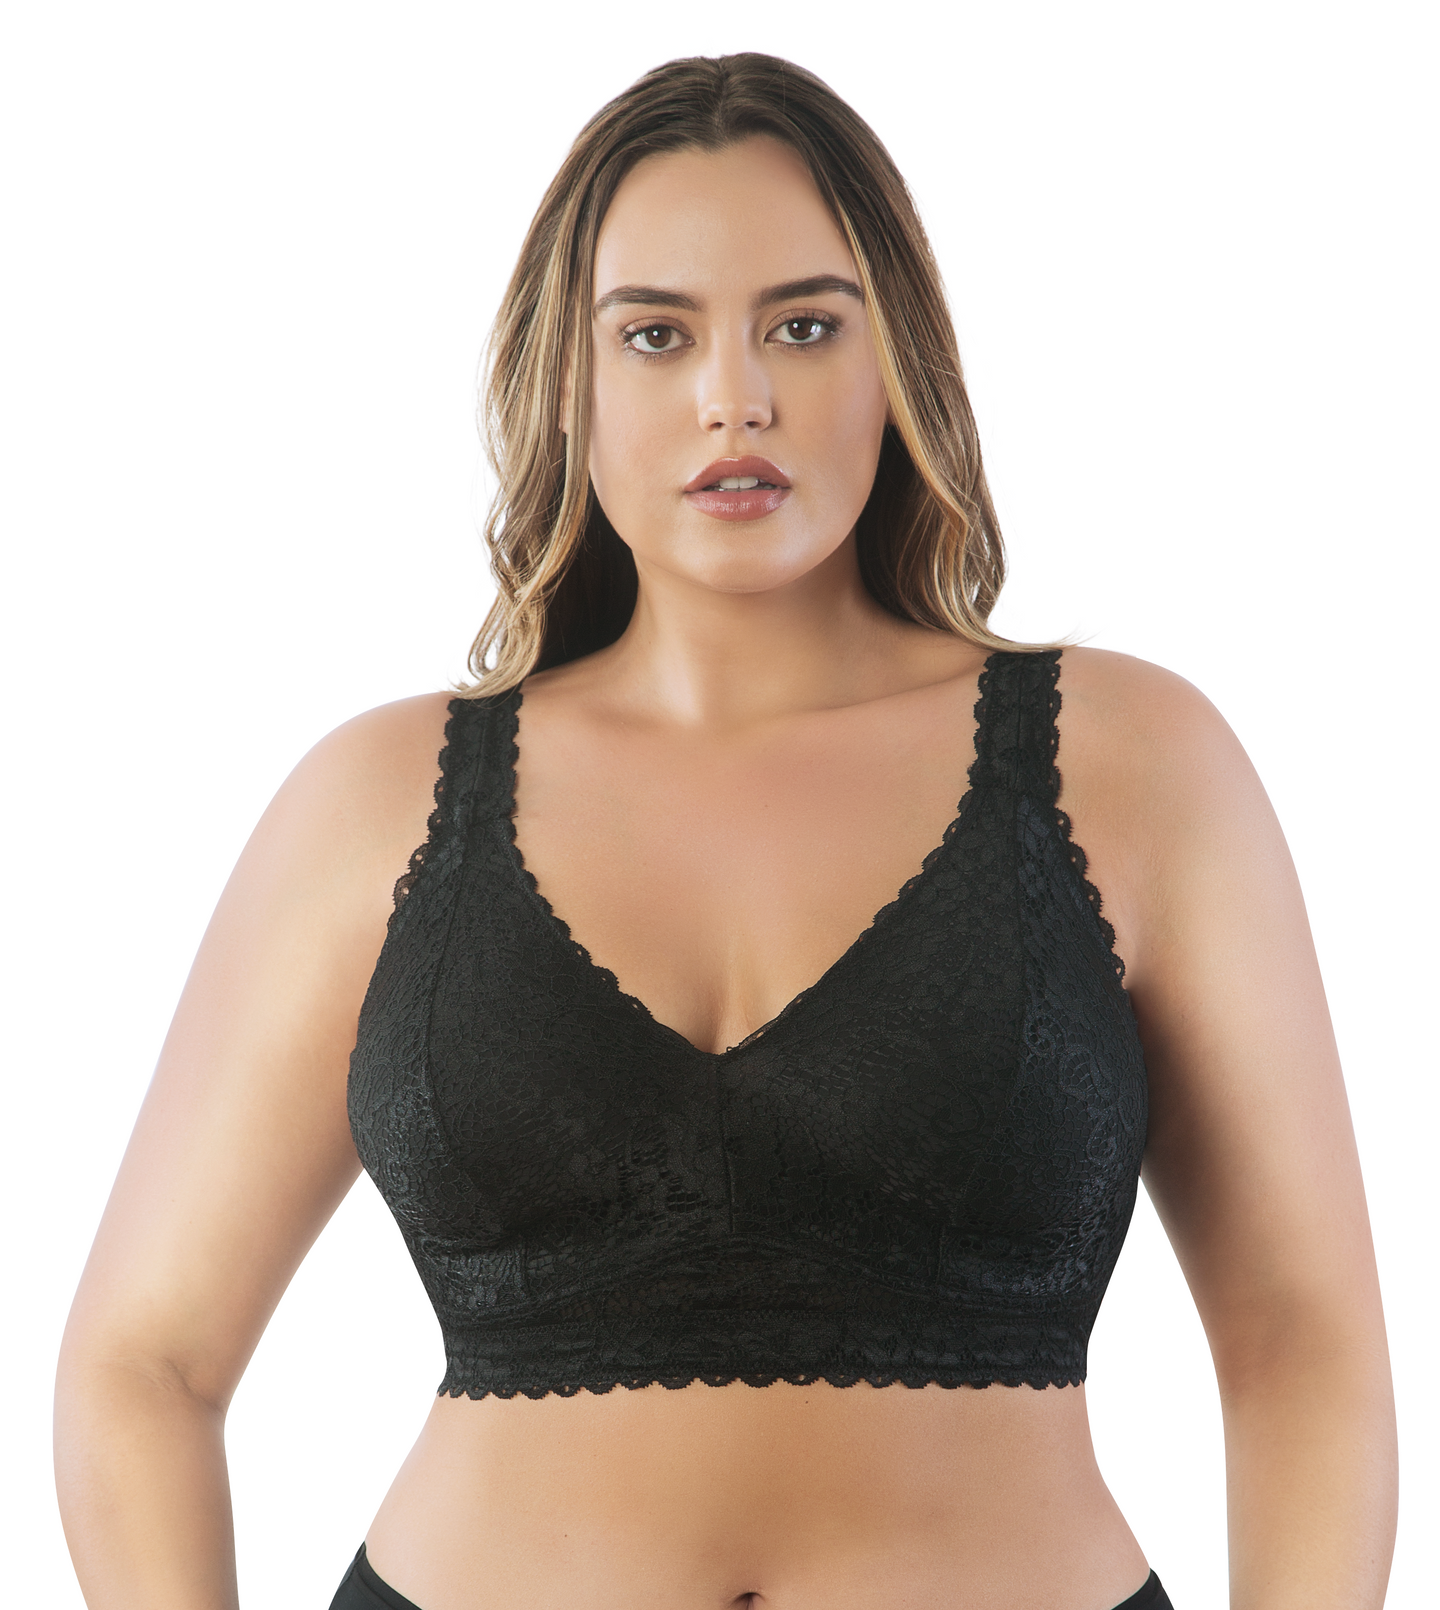 Adriana lace bralette - The Pencil Test